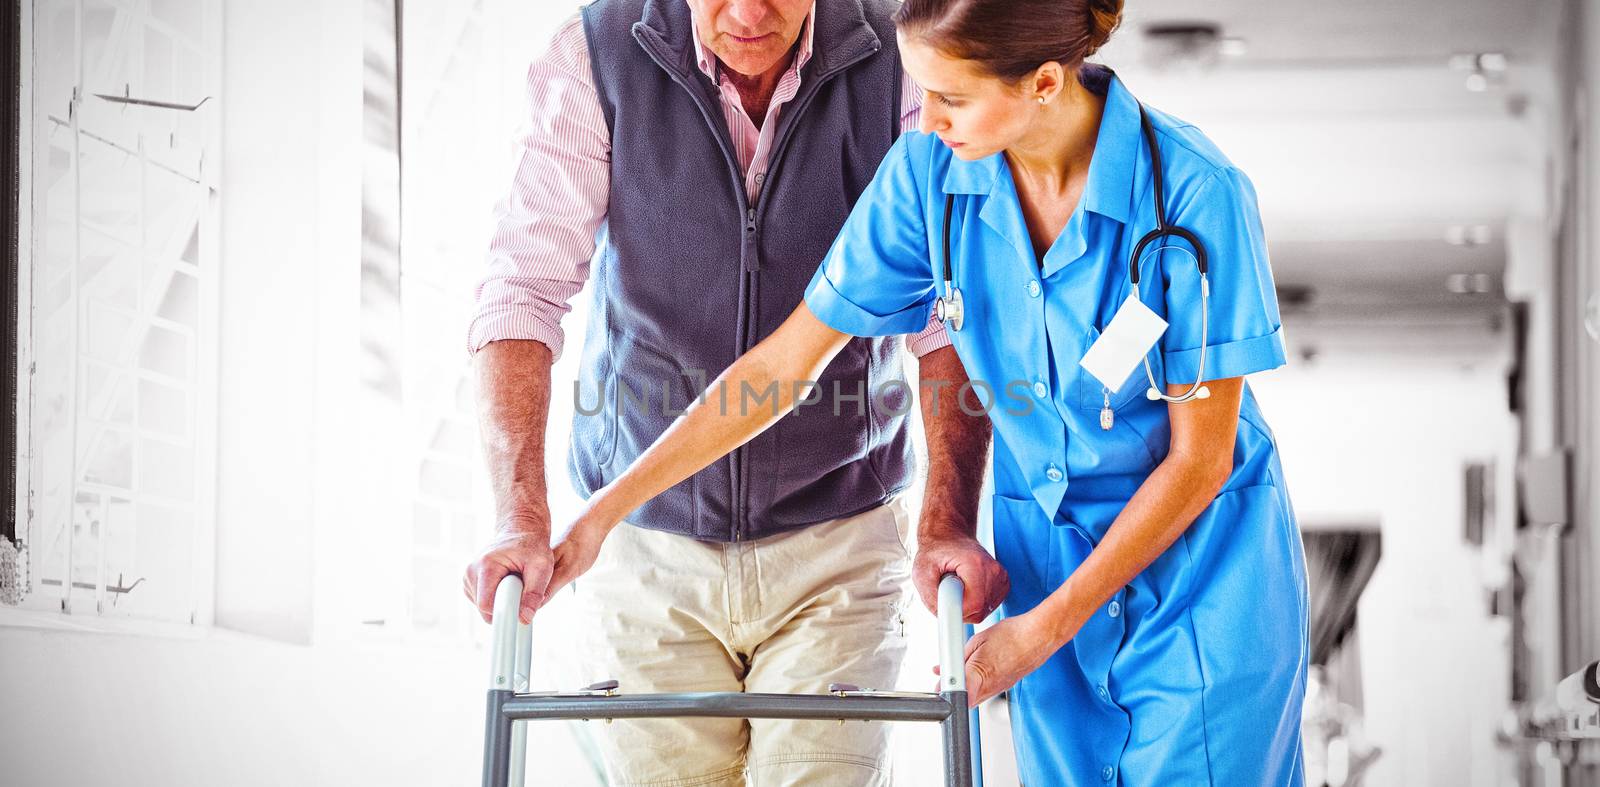 Nurse helping senior man with walking aid in a retirement home